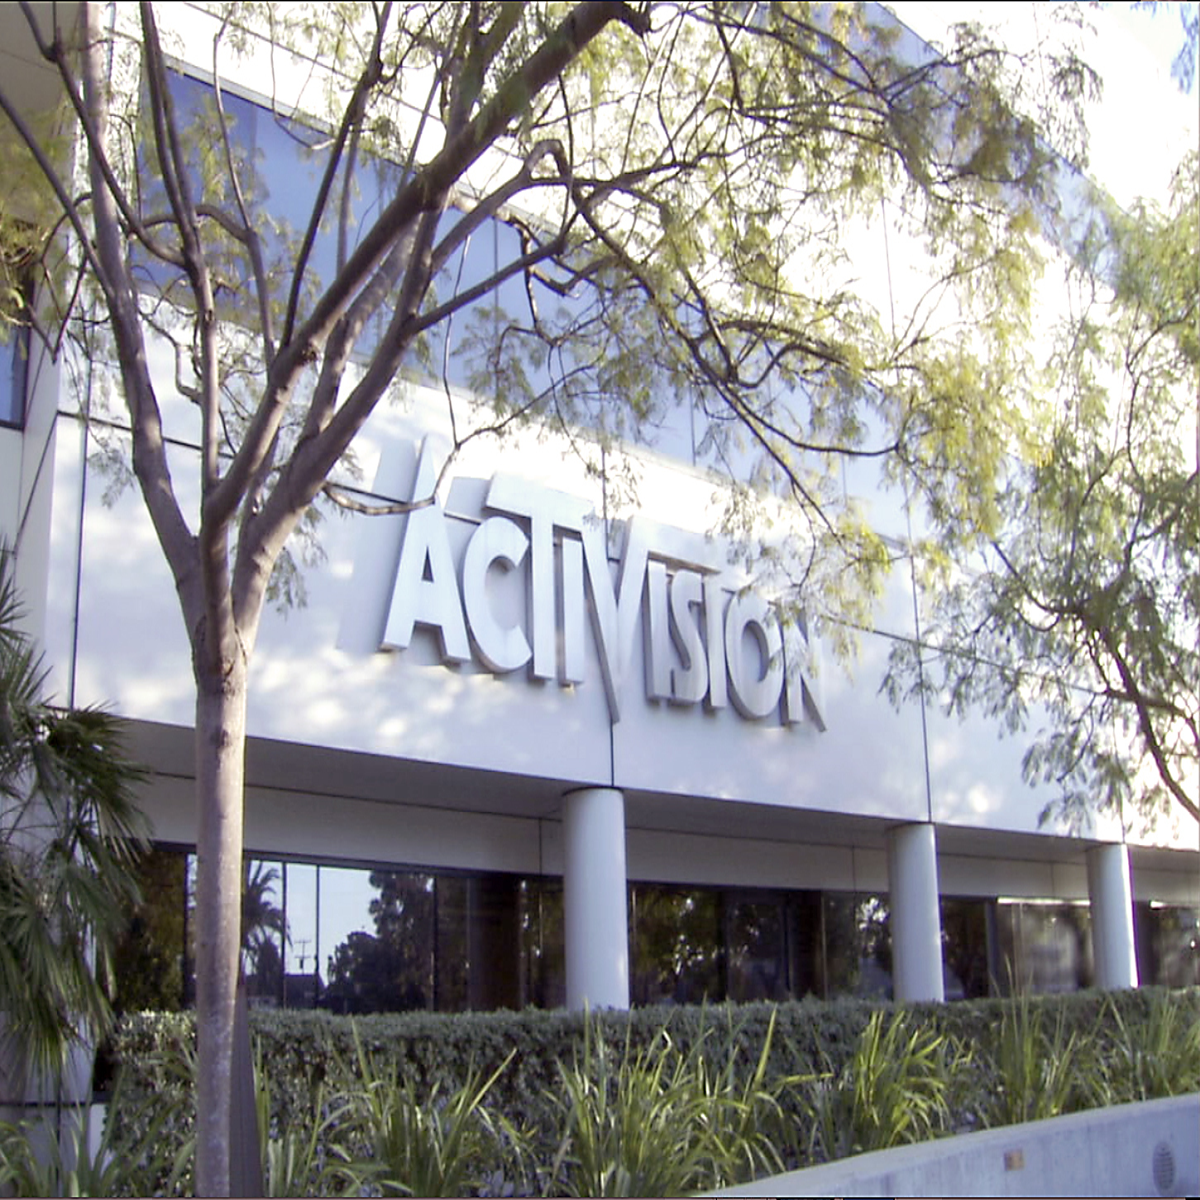 Microsoft-Activision deal provisionally approved by U.K. regulator - Polygon